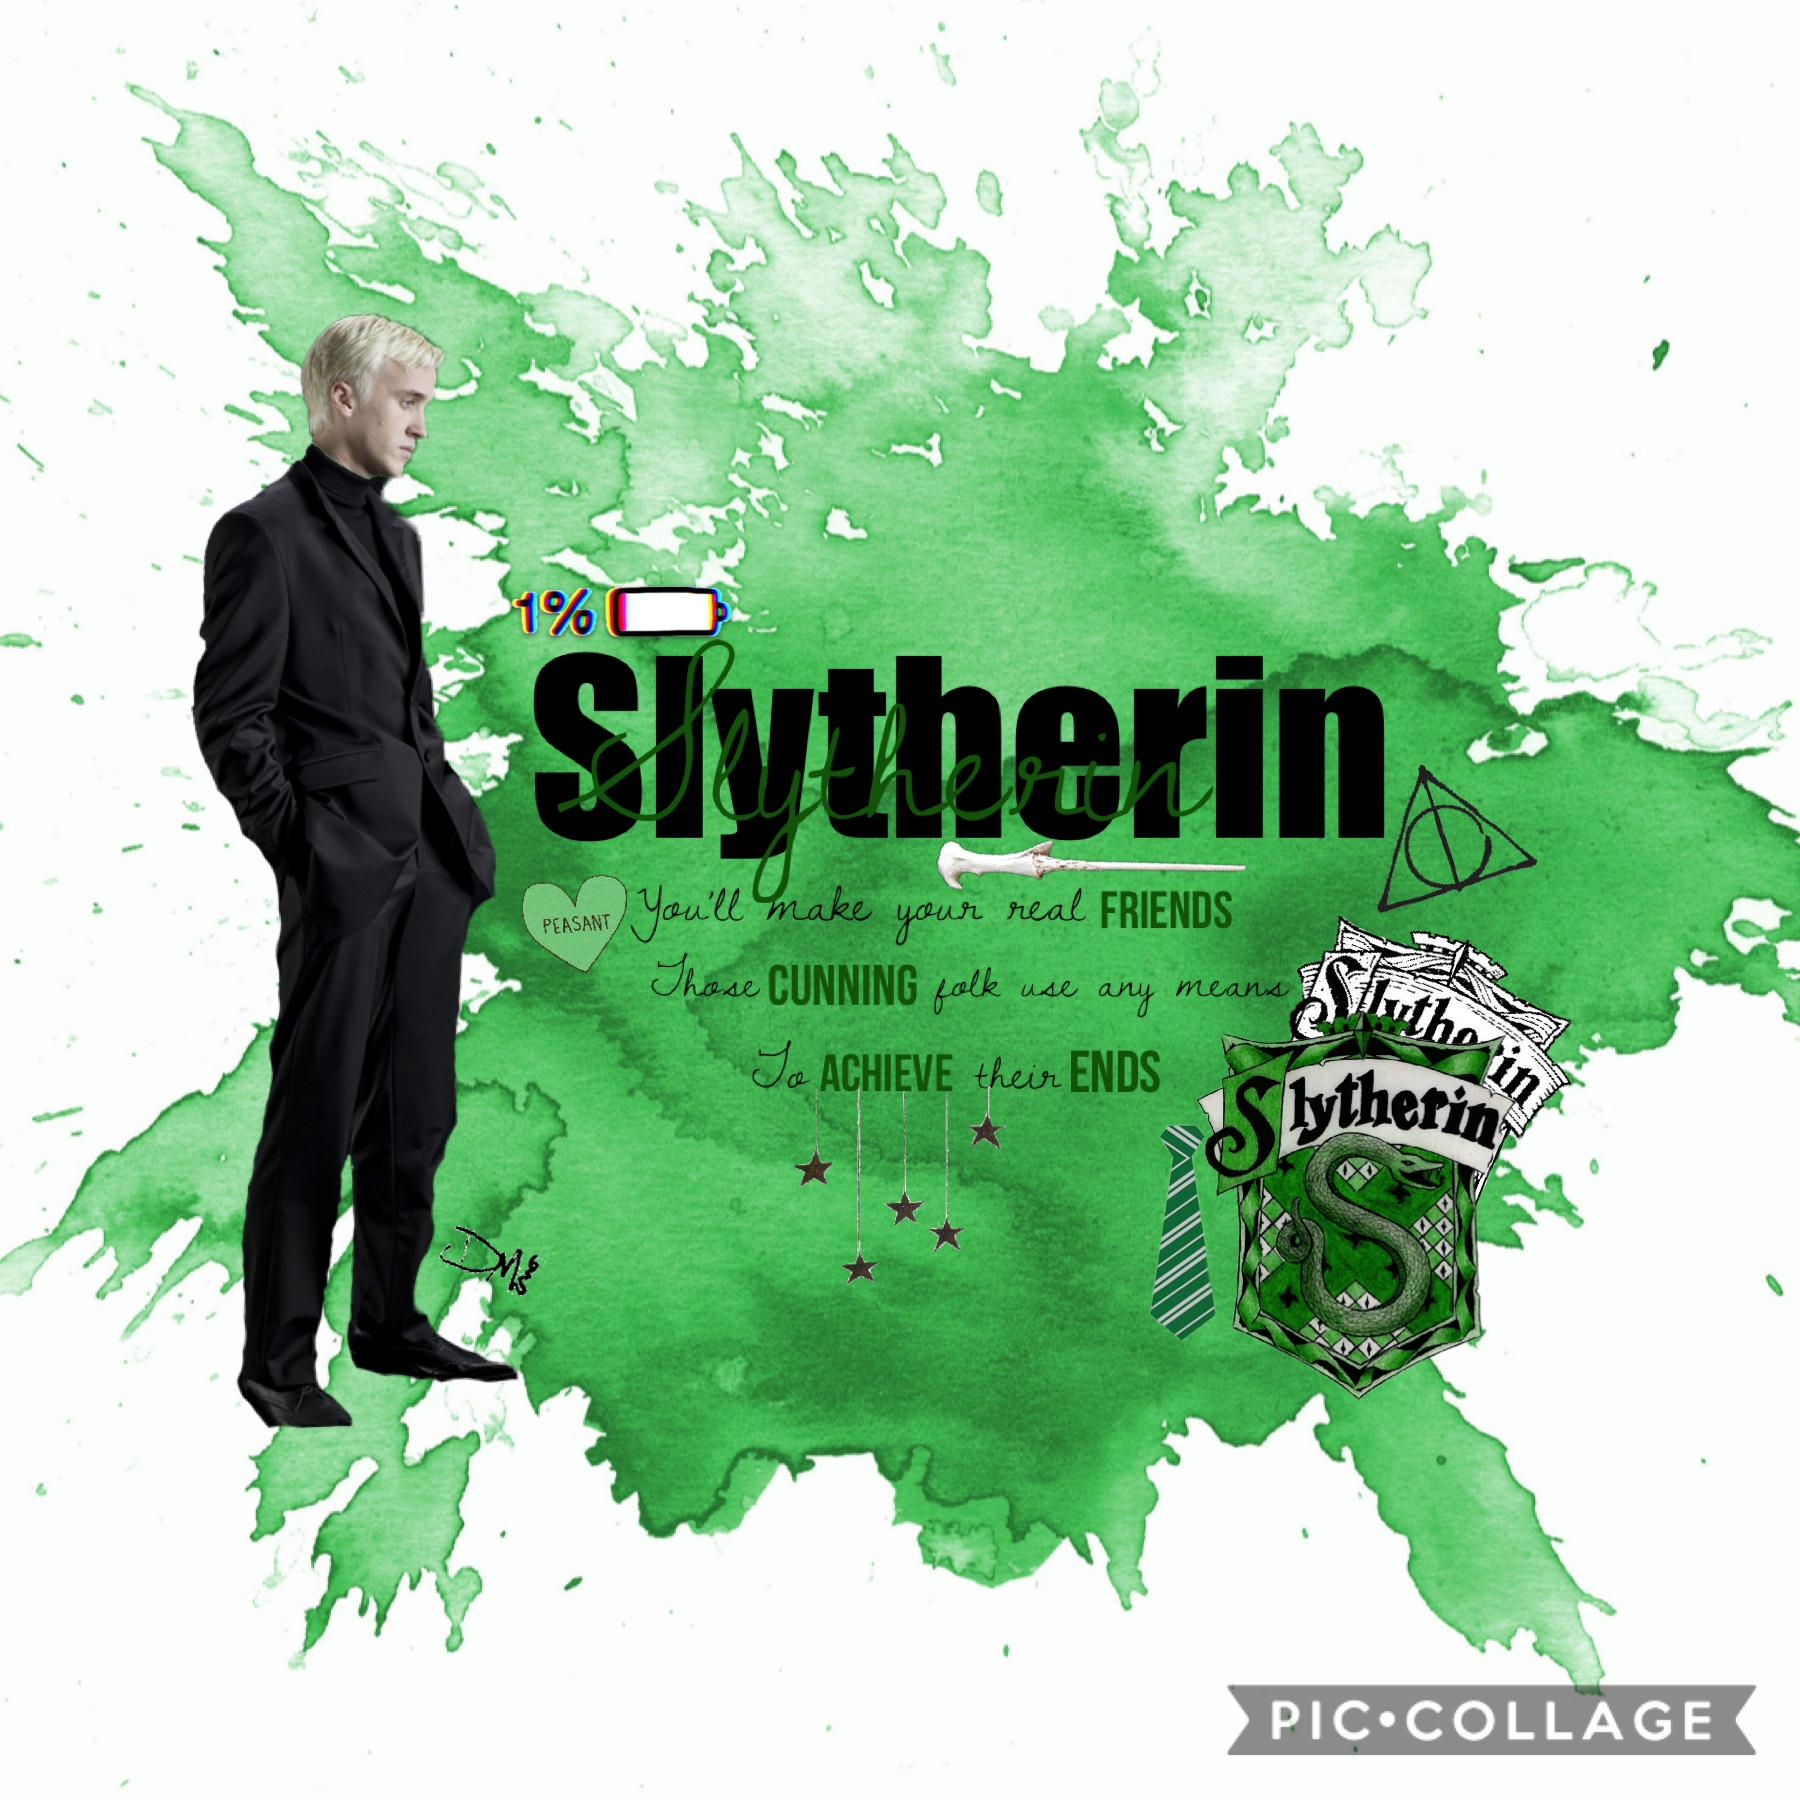 For all you Slytherins out there, next Hufflepuff! :)